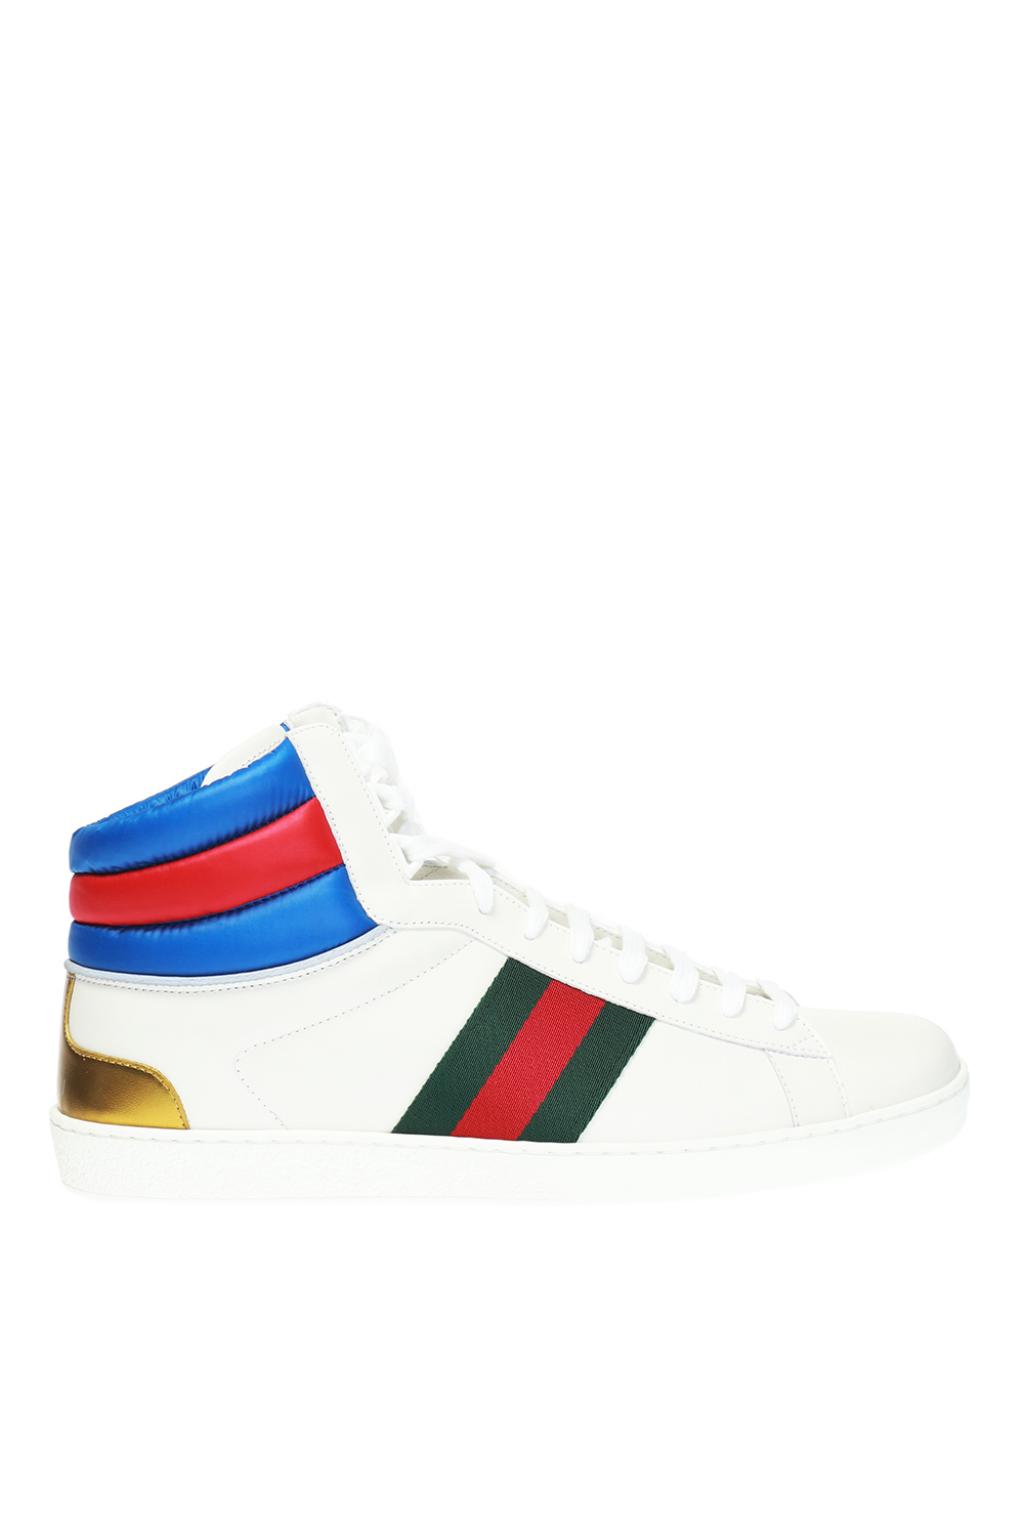 gucci ace high